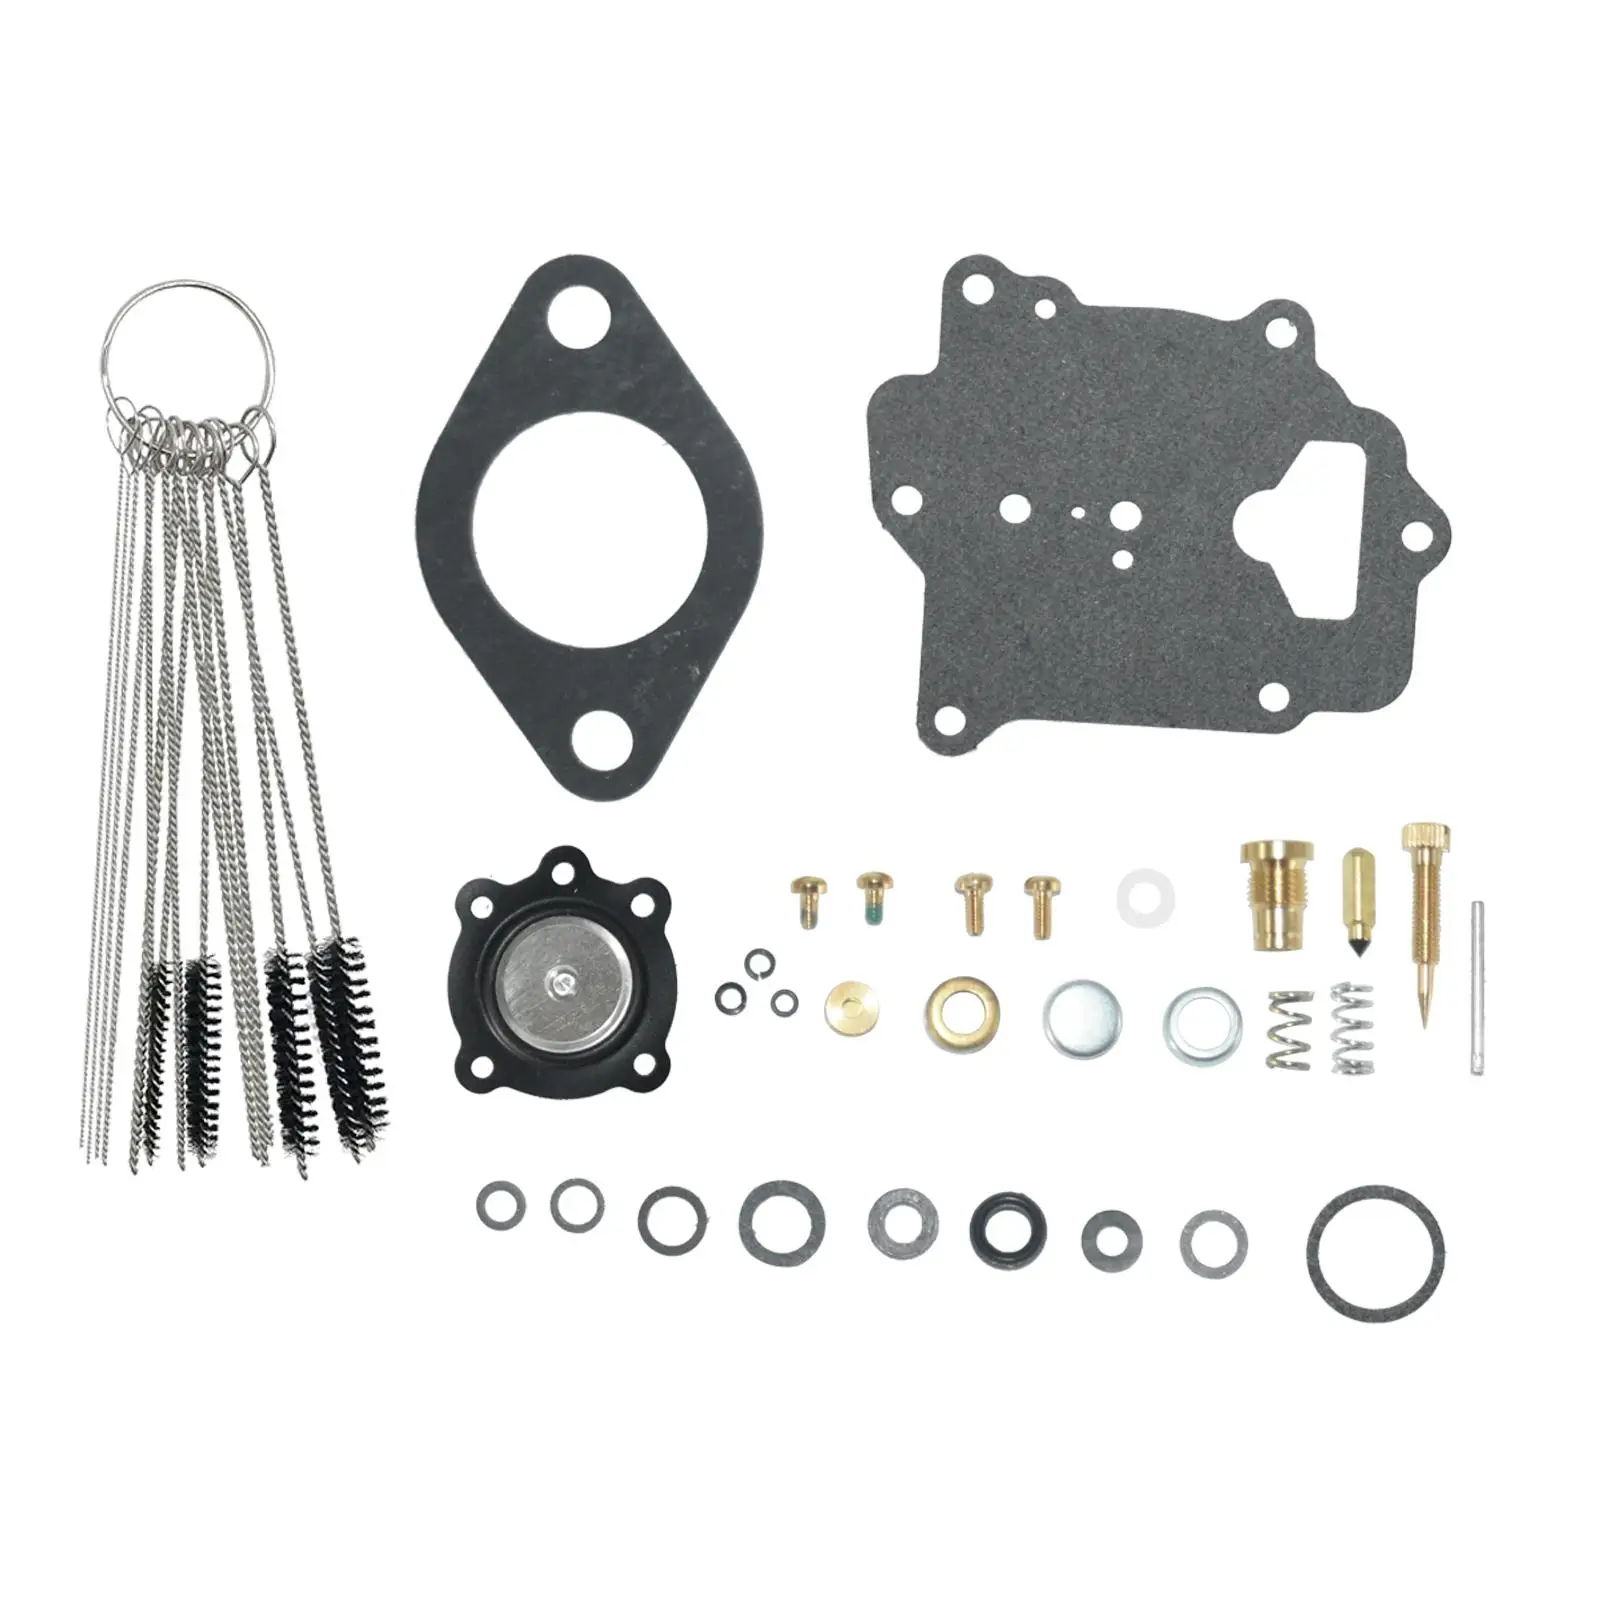 Carburetor Rebuild Kit Spare Parts Replacement Easy to Install 13660 Accessories Carburetor Kit for Jeep M151 Mutt Amc 151